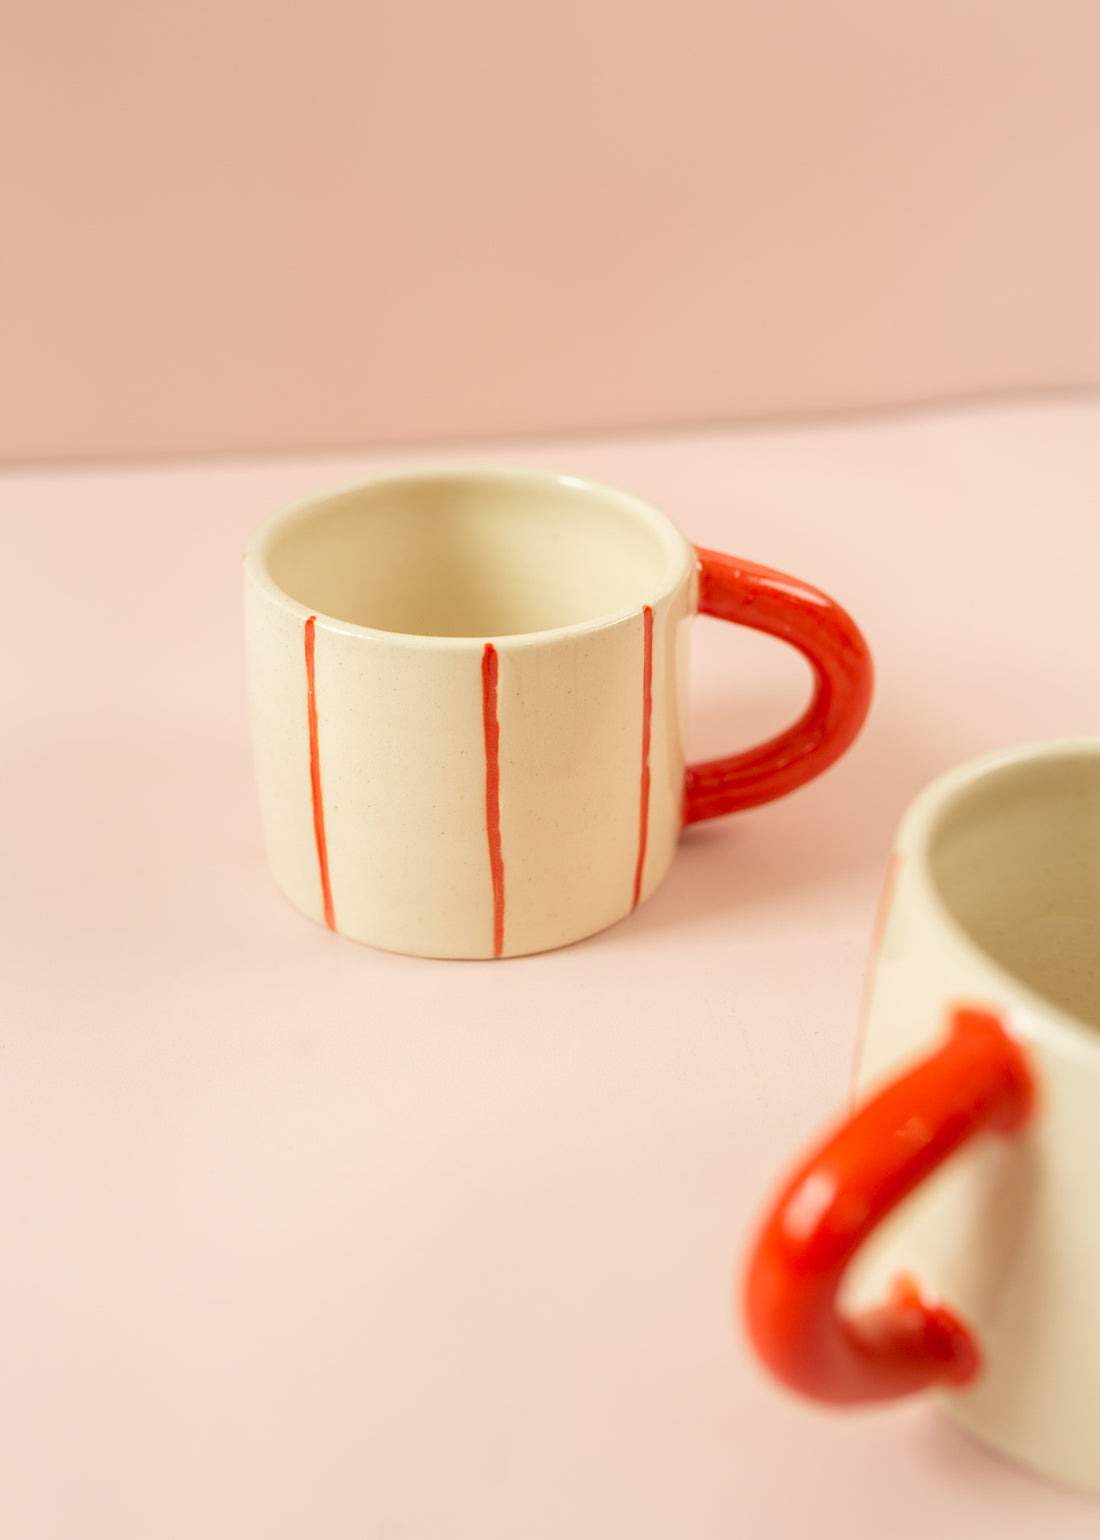 Photo of a cream ceramic mug with light red stripes going around the mug vertically, and a red handle. Another mug is in the foreground